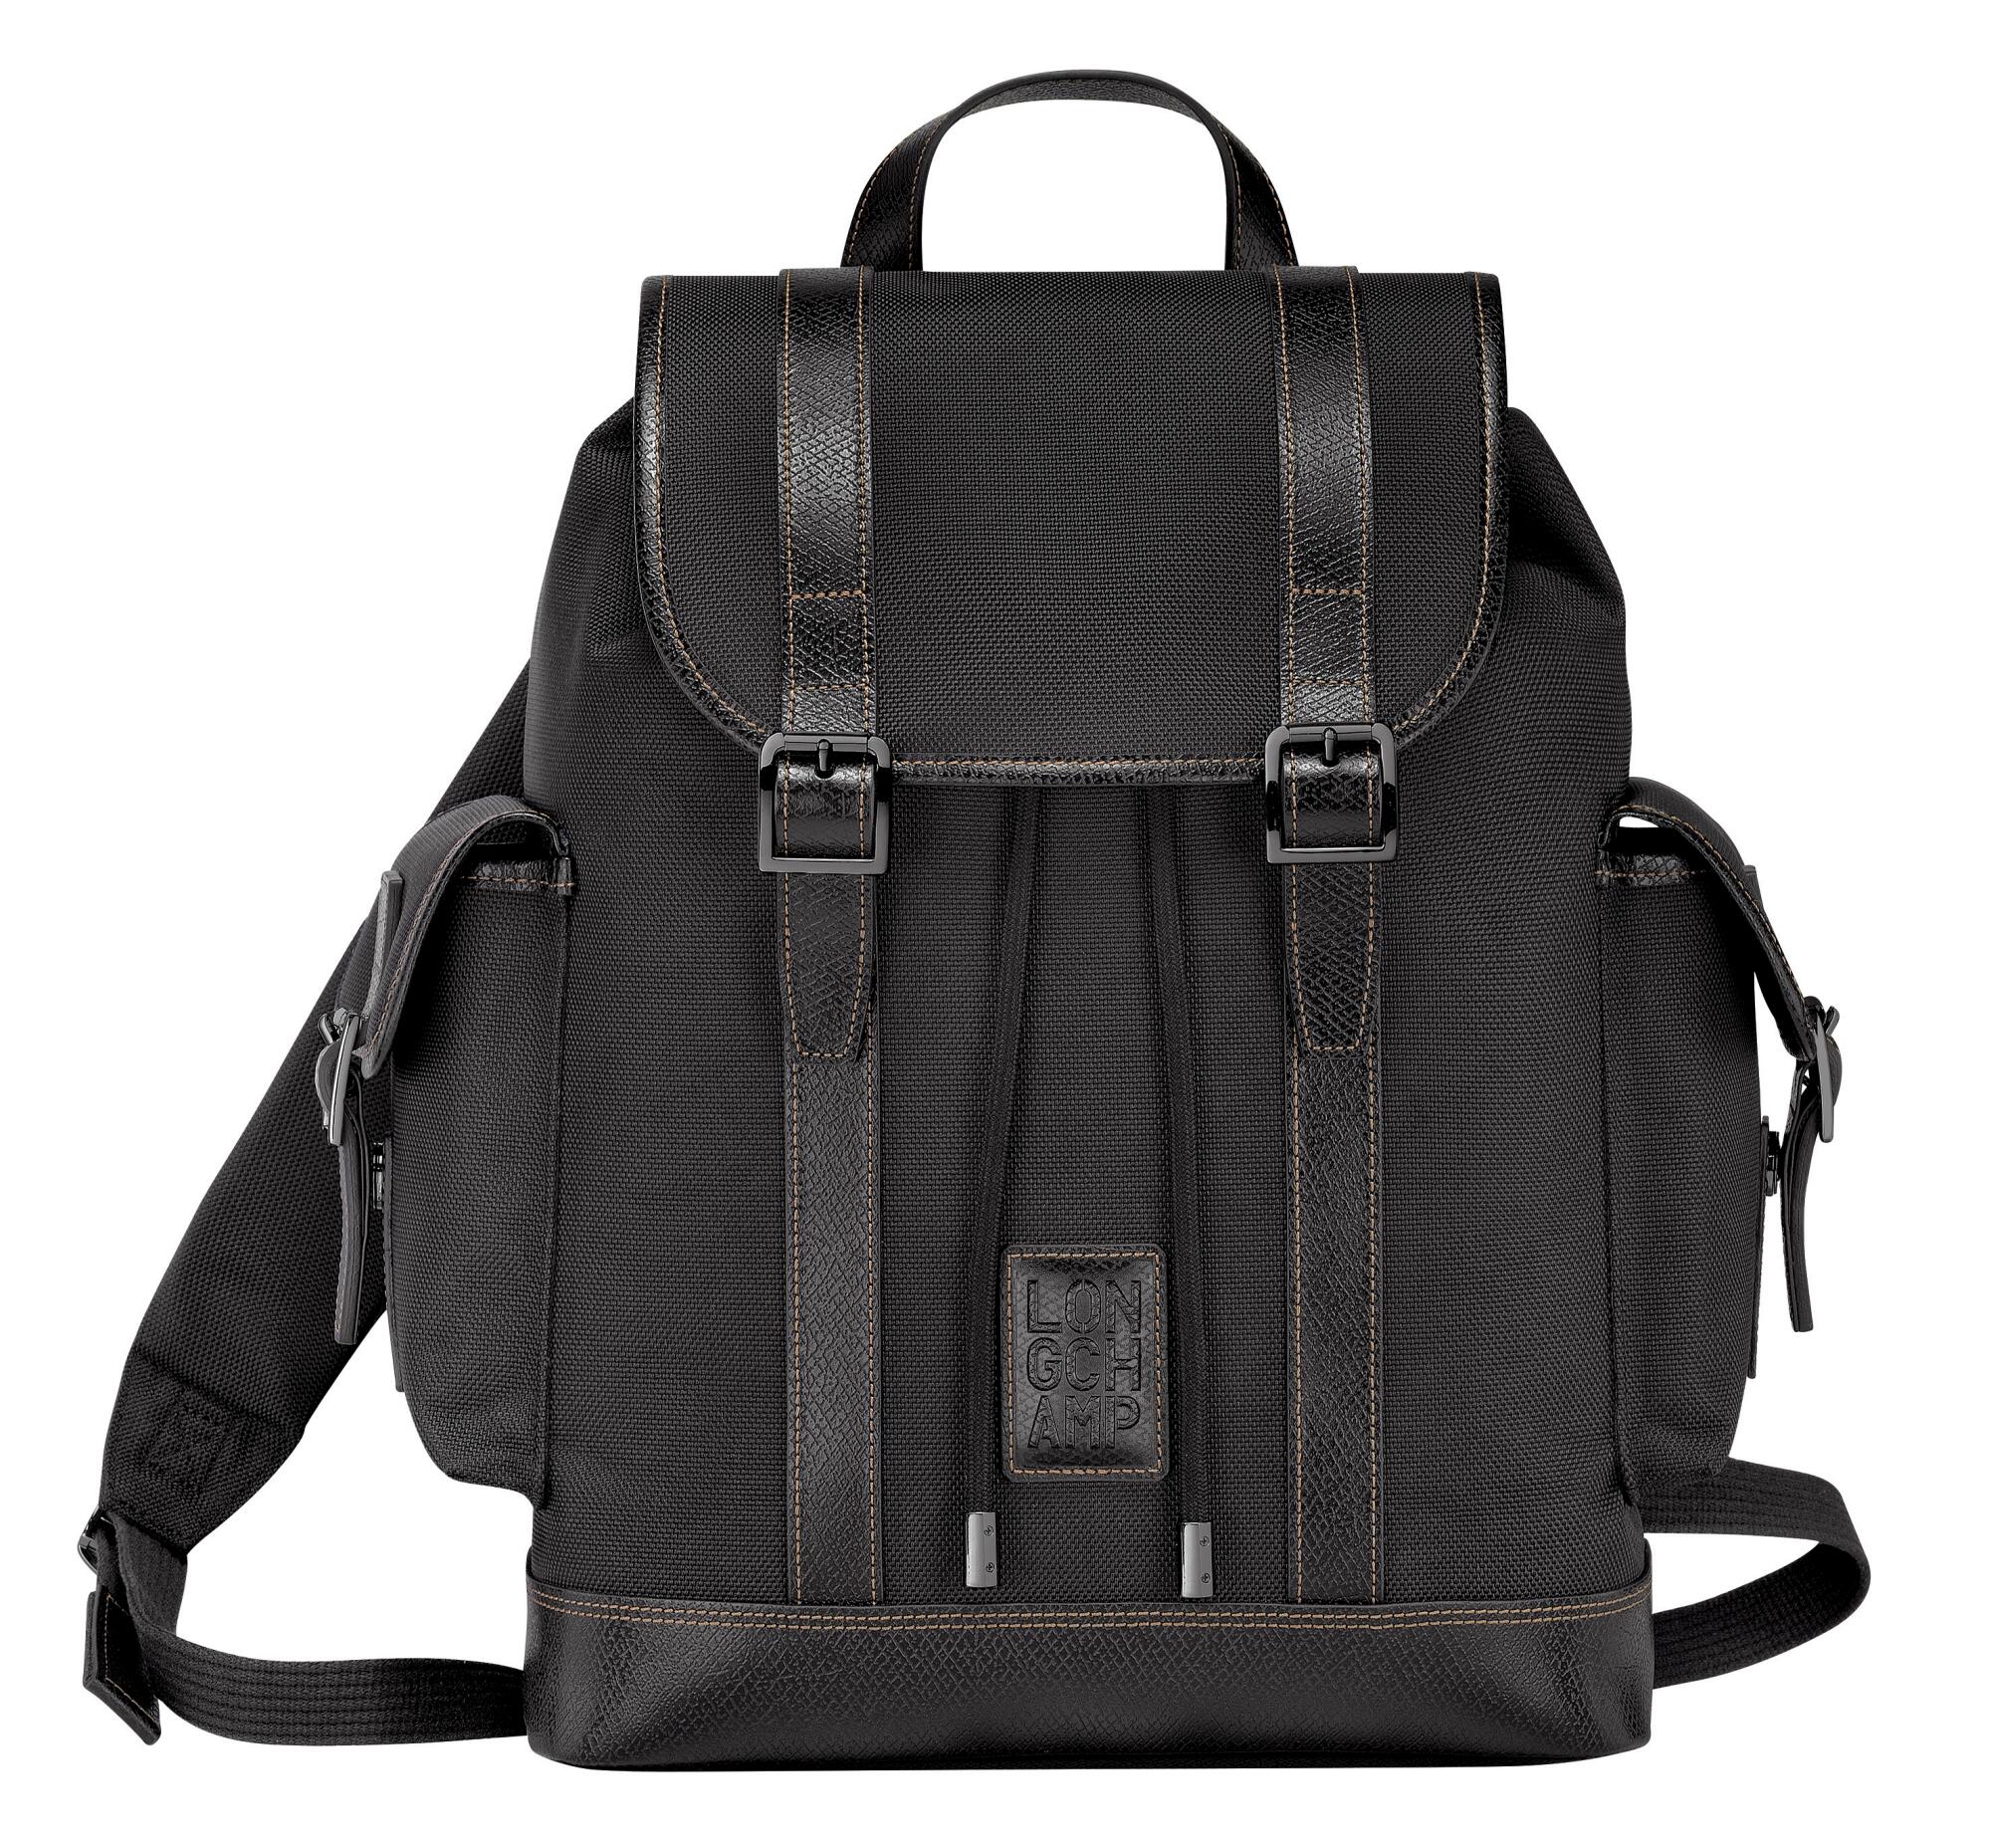 A black canvas backpack